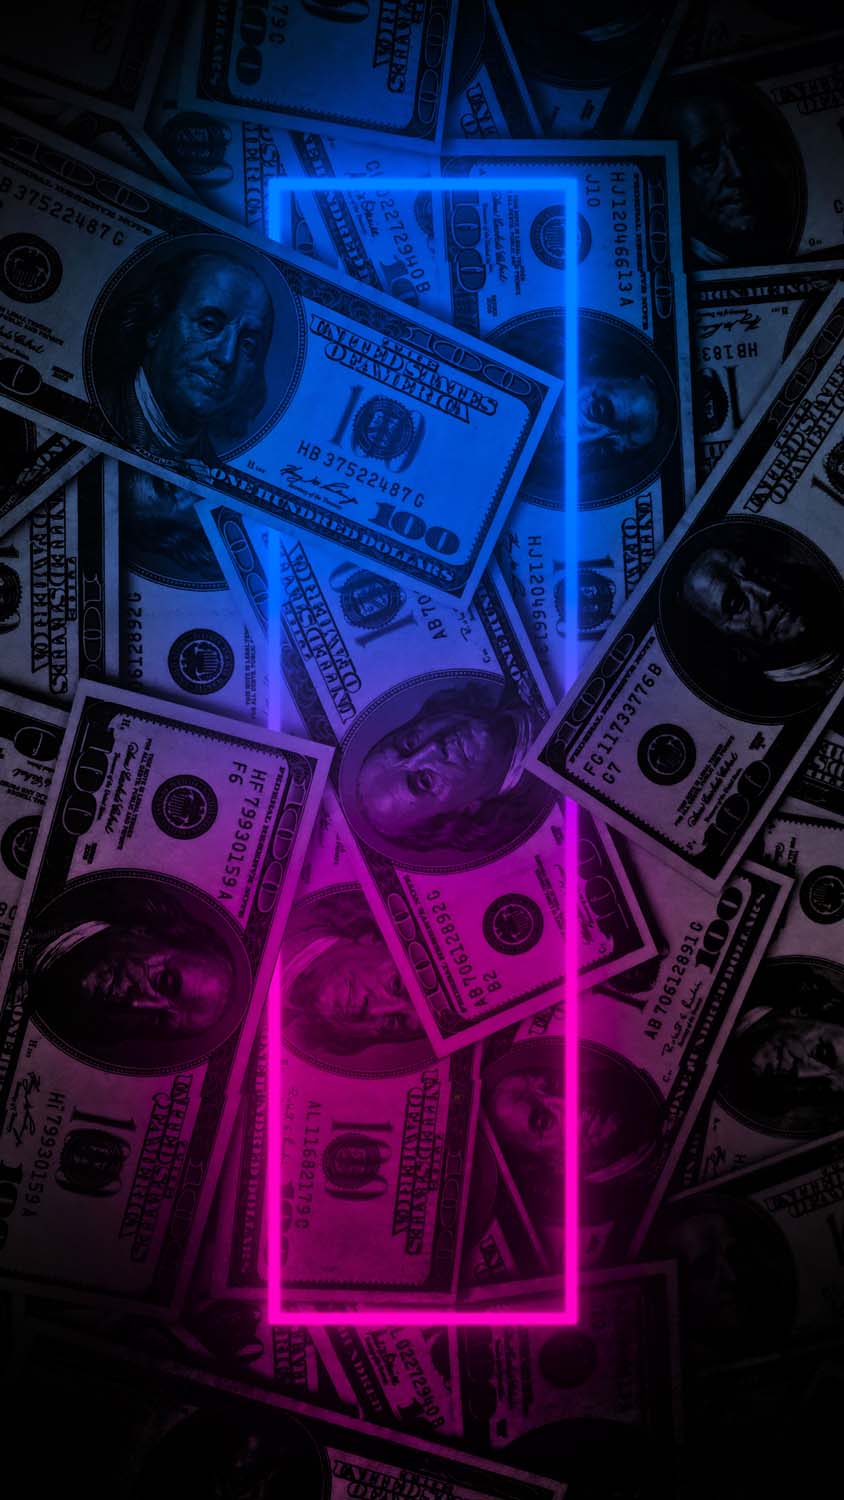 A pile of money with neon lights - Money